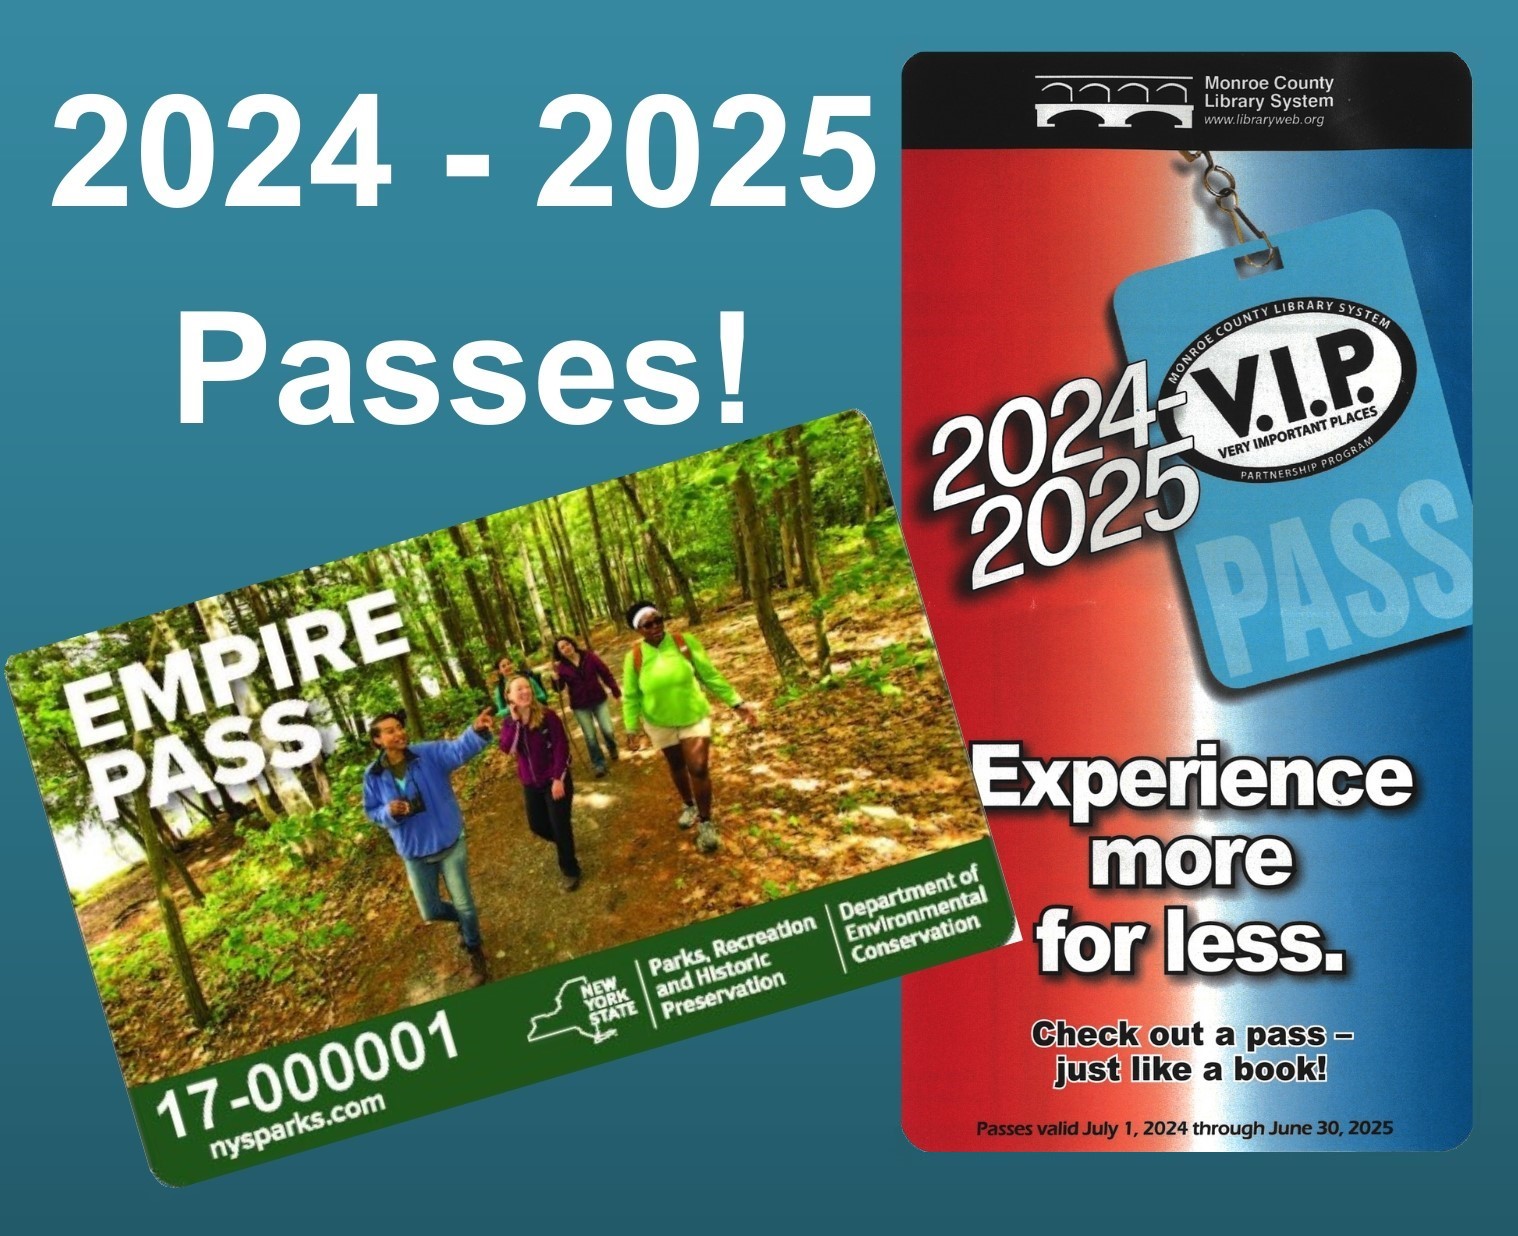 2 brochures shown. First the Both the New York State Parks Empire Pass and second the Monroe County Library System's Very Important Places discounts.